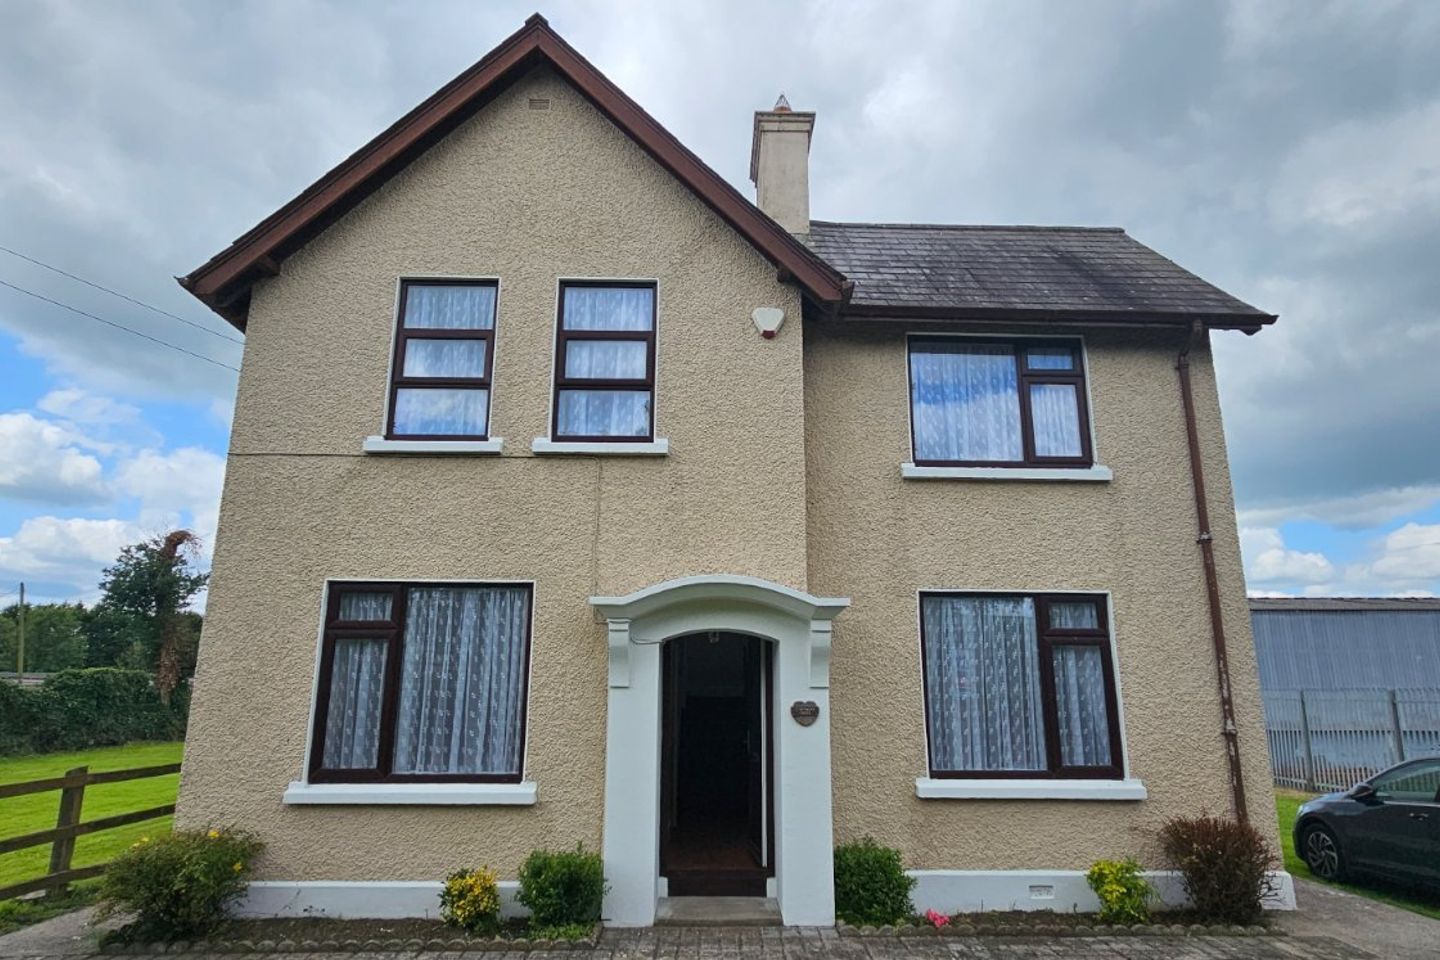 Conniberry House, Old Knockmay Road, Portlaoise, Co. Laois